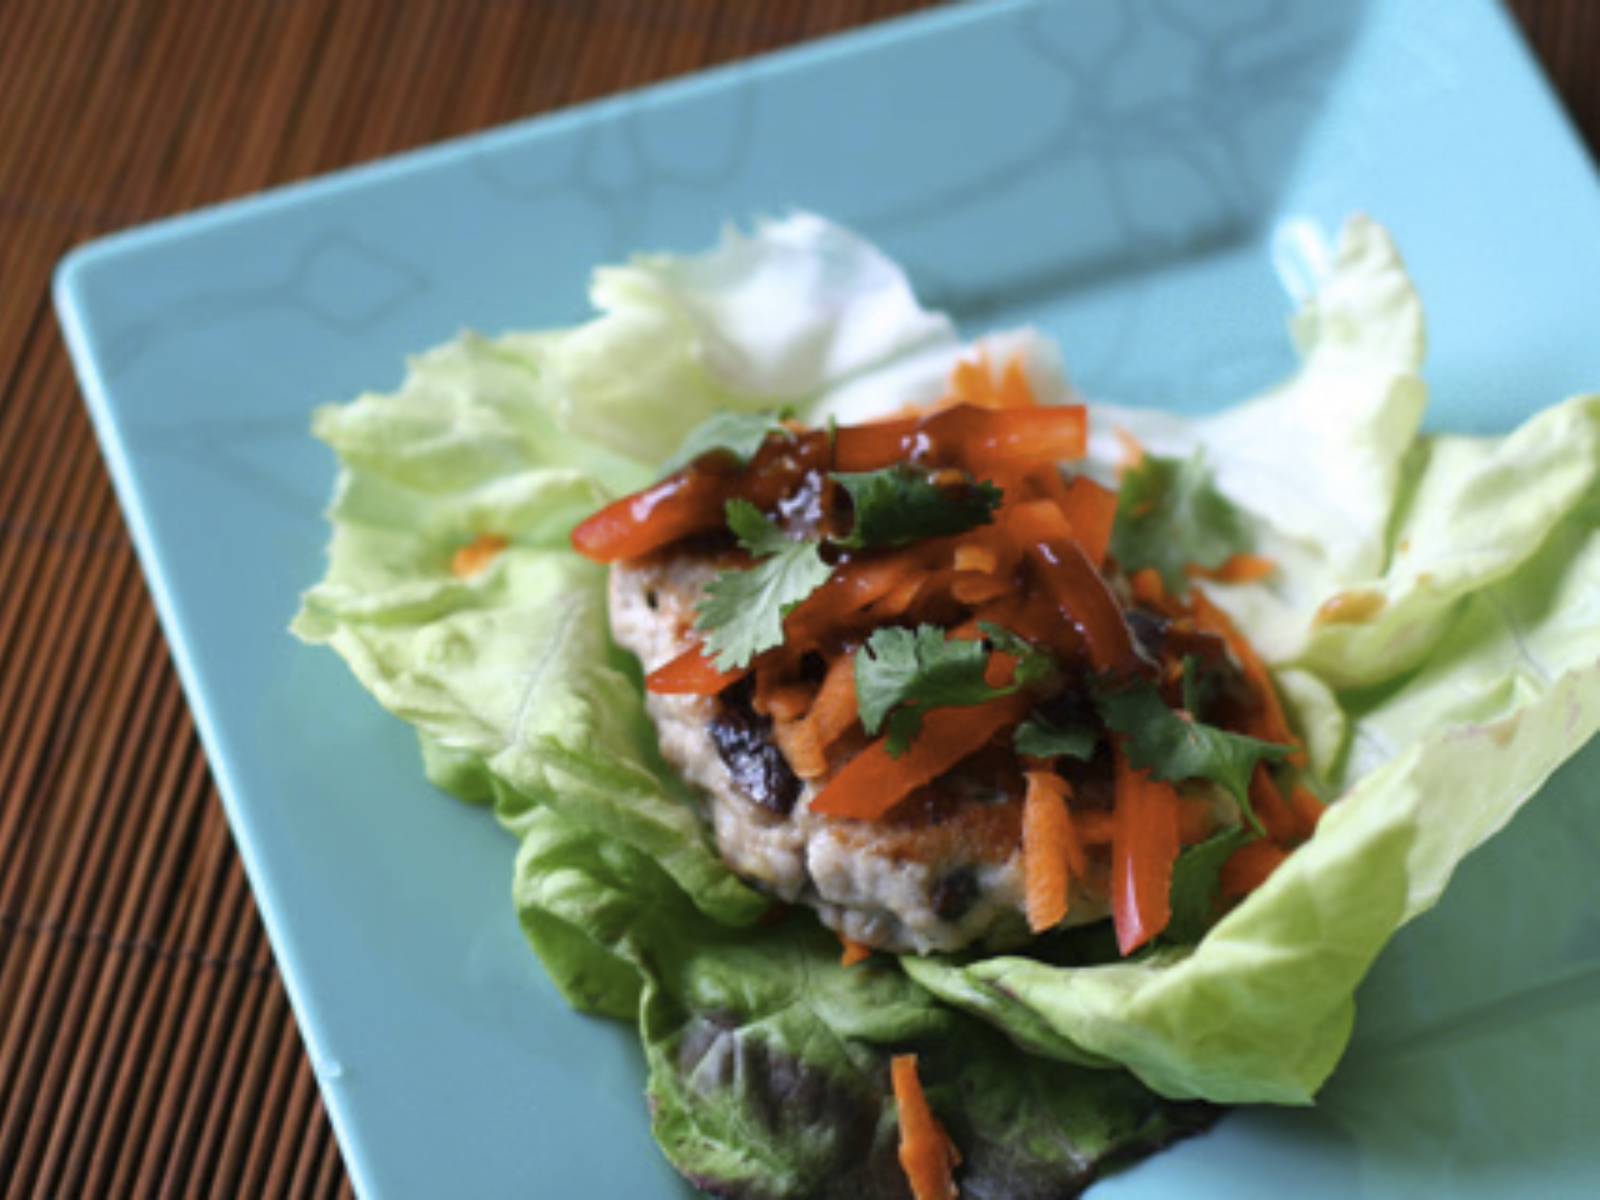 pork burger in a lettuce wrap with veggies